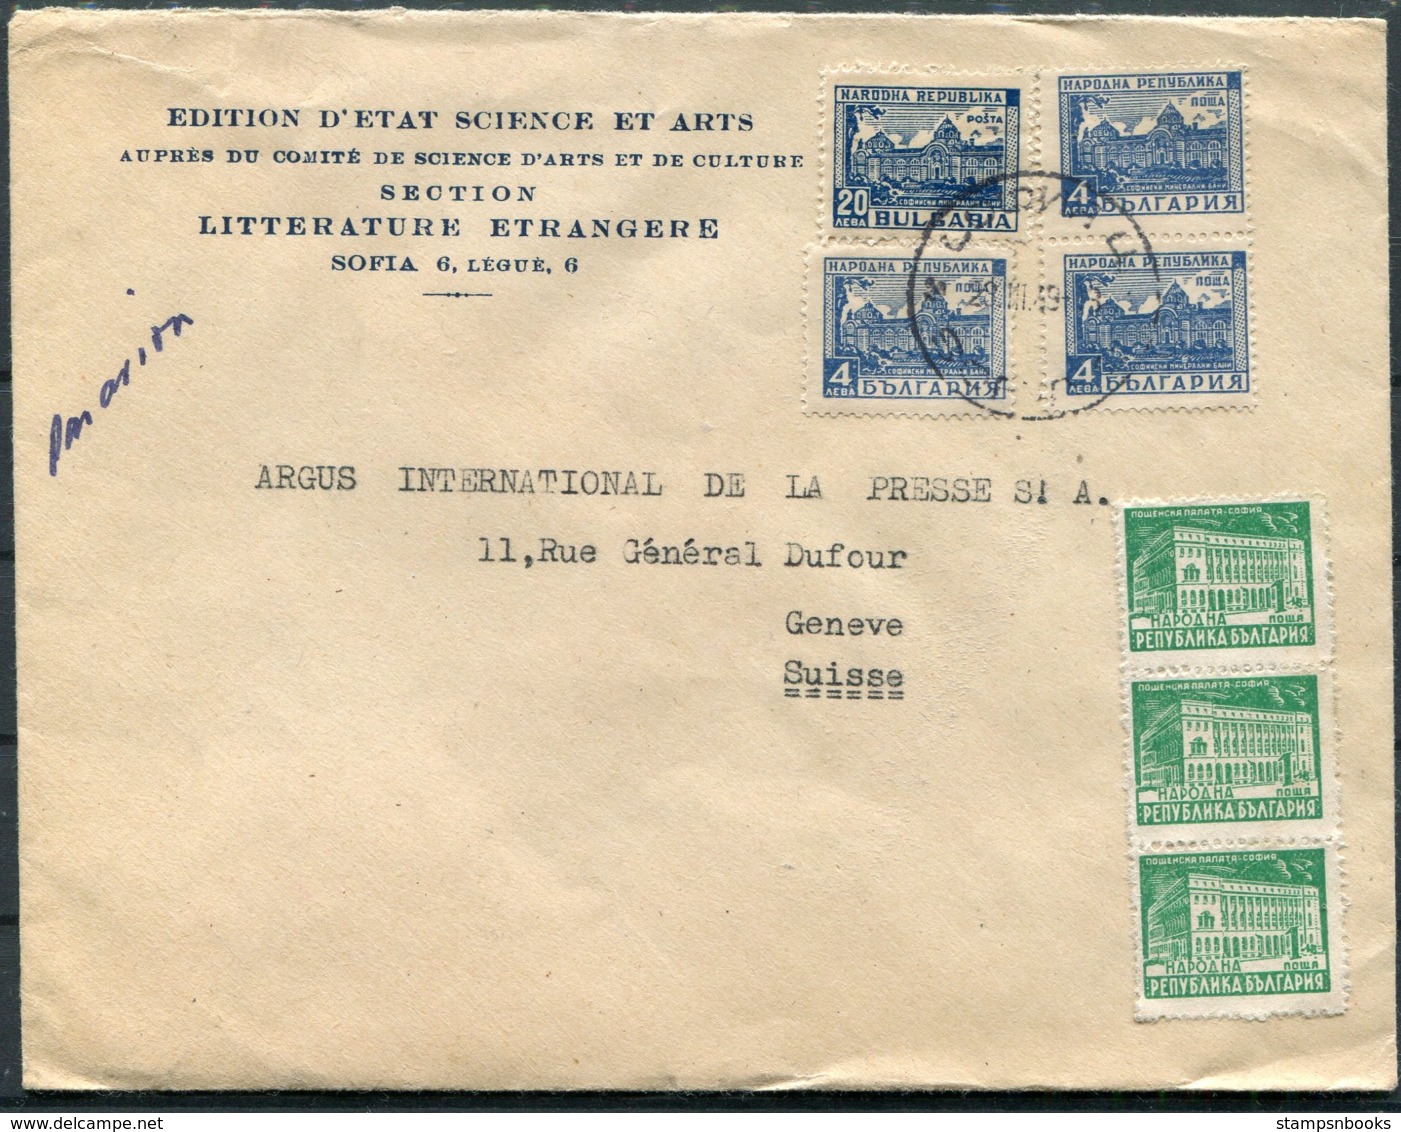 1949 Bulgaria Government Department Of Science Arts Literature Airmail Cover - Argus Press Agency, Geneva Swizerland - Covers & Documents